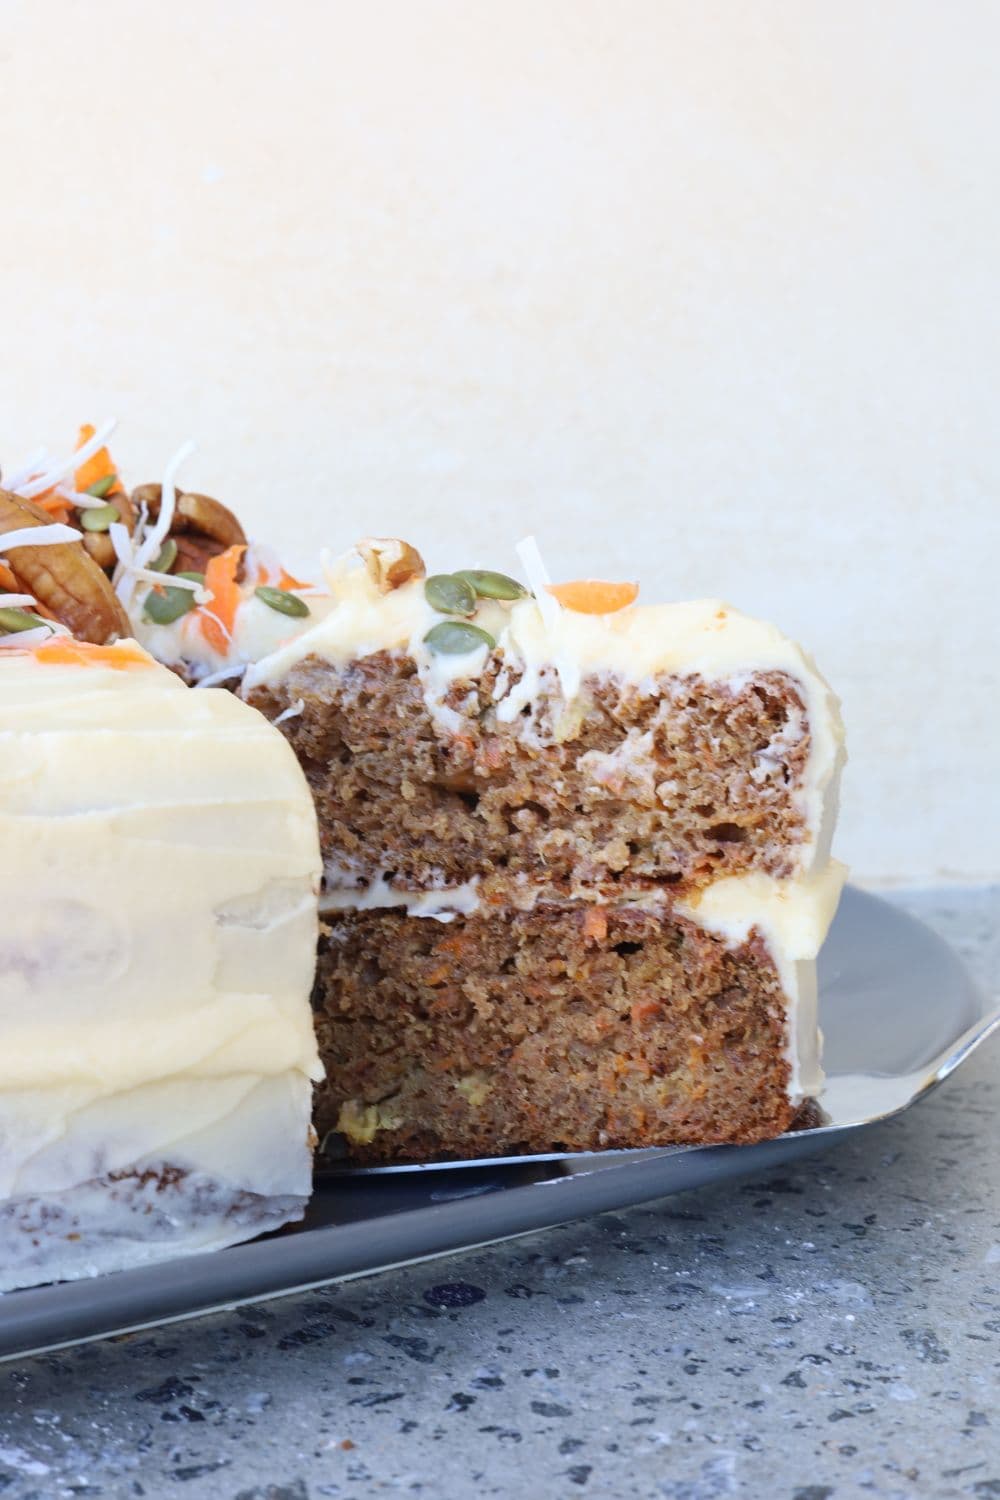 Carrot Cake Recipe | We Are Tate and Lyle Sugars